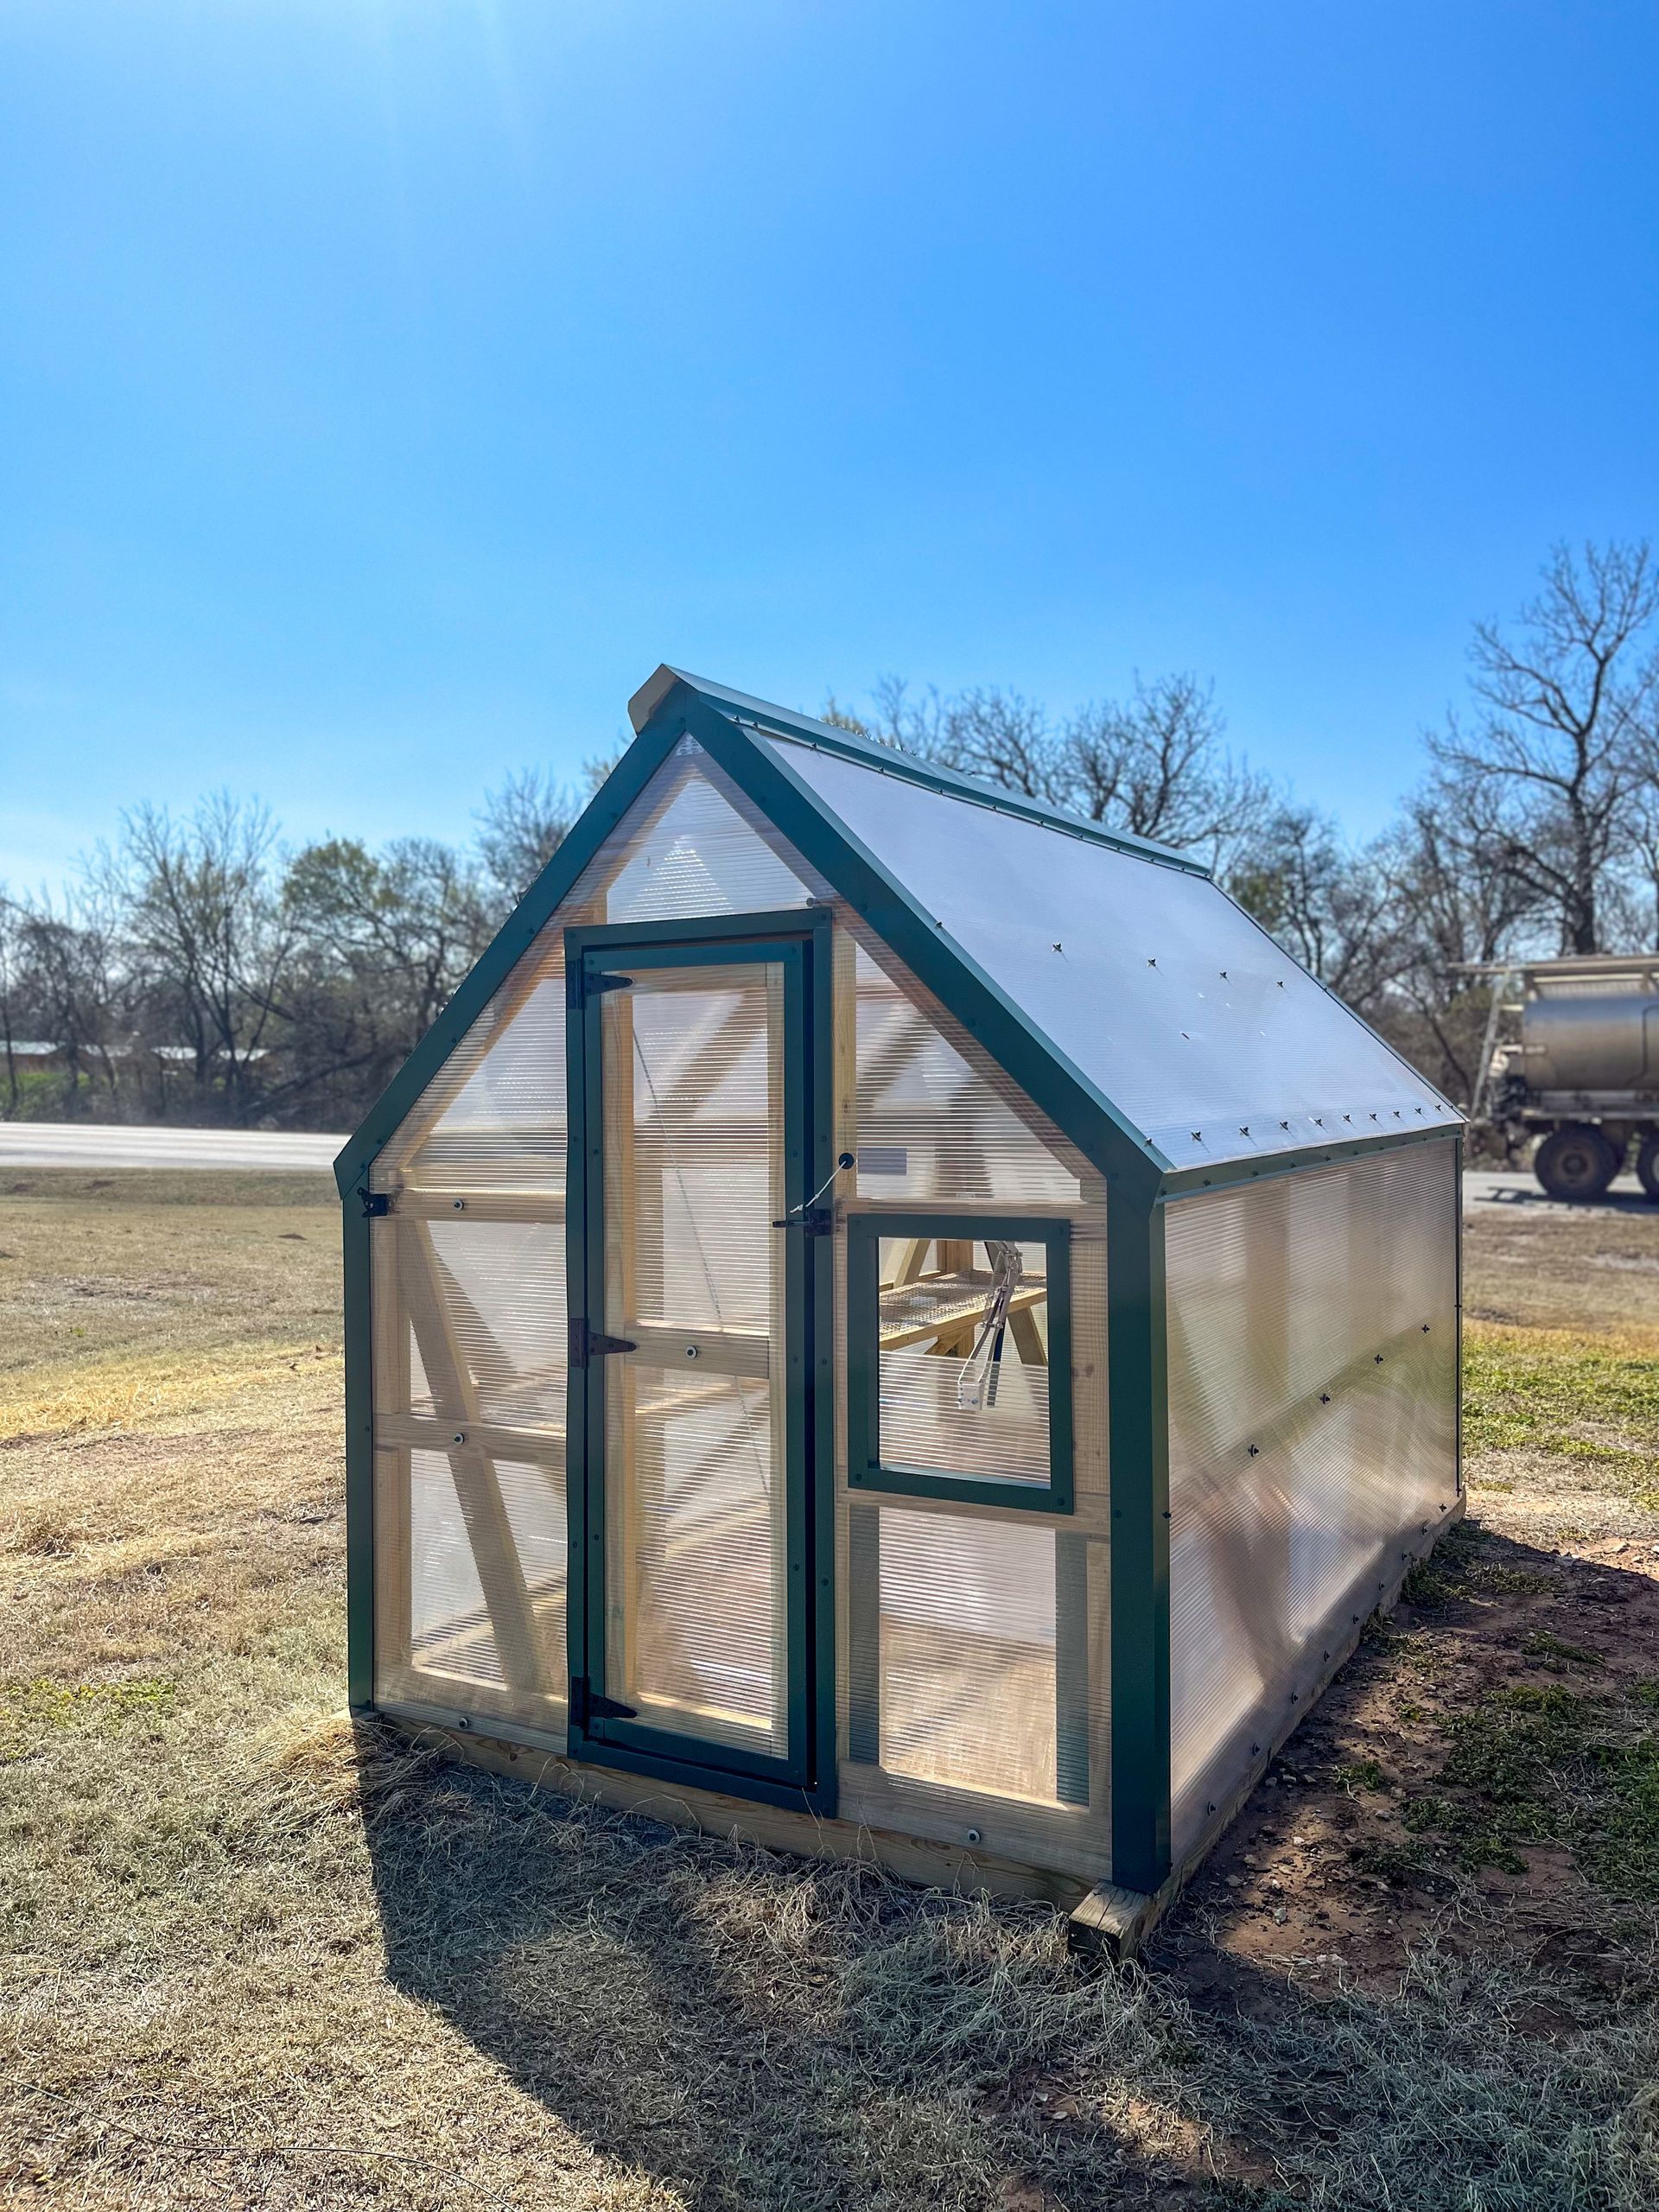 A greenhouse is sitting in the middle of a dirt field.